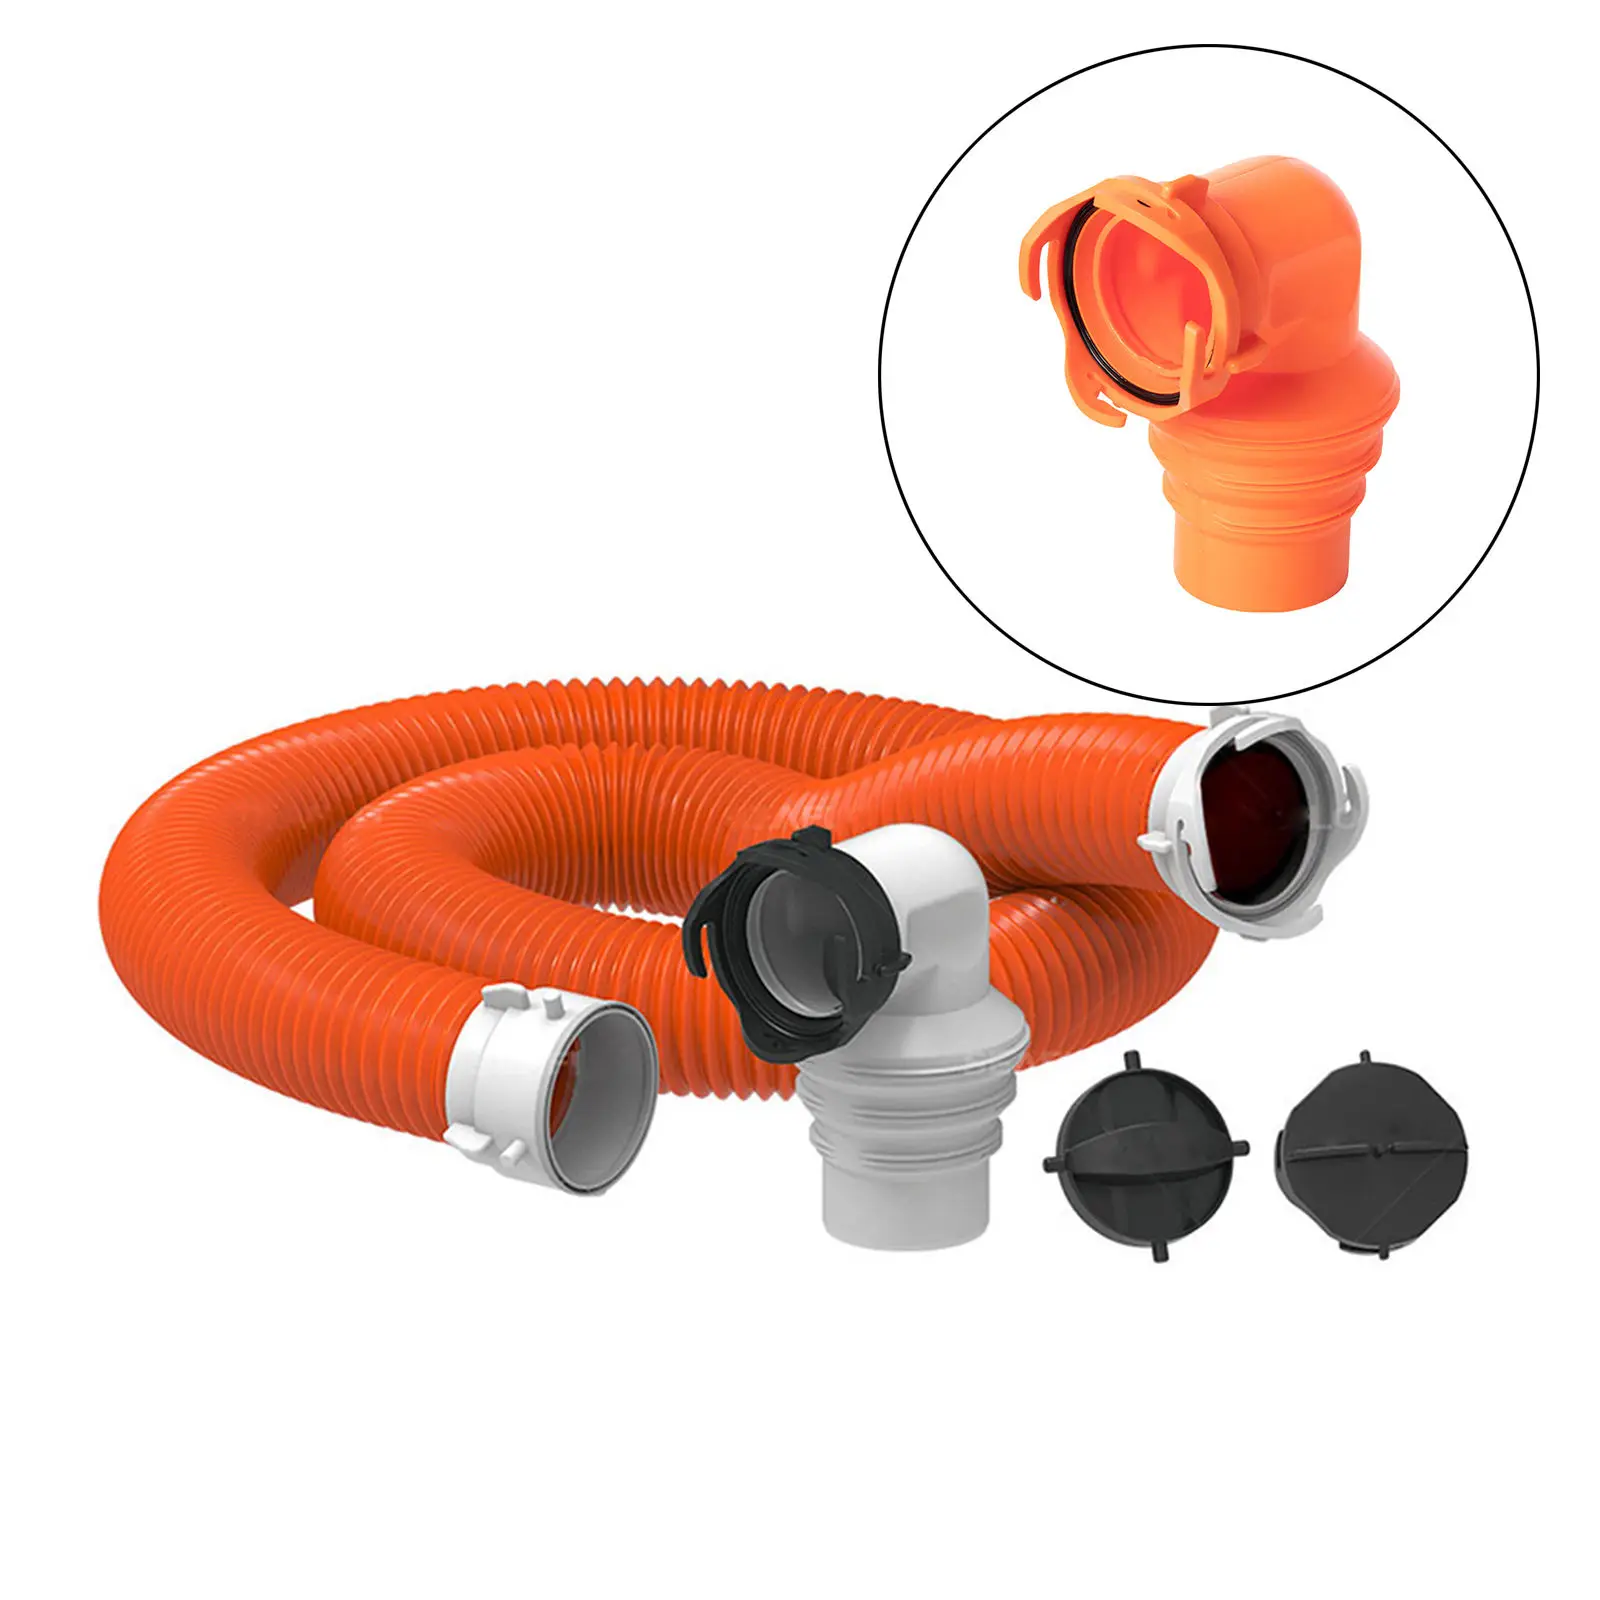 

1Pcs 90 Degree Sewer Hose Swivel Elbow Fitting Adapter for RV Waste Tanks